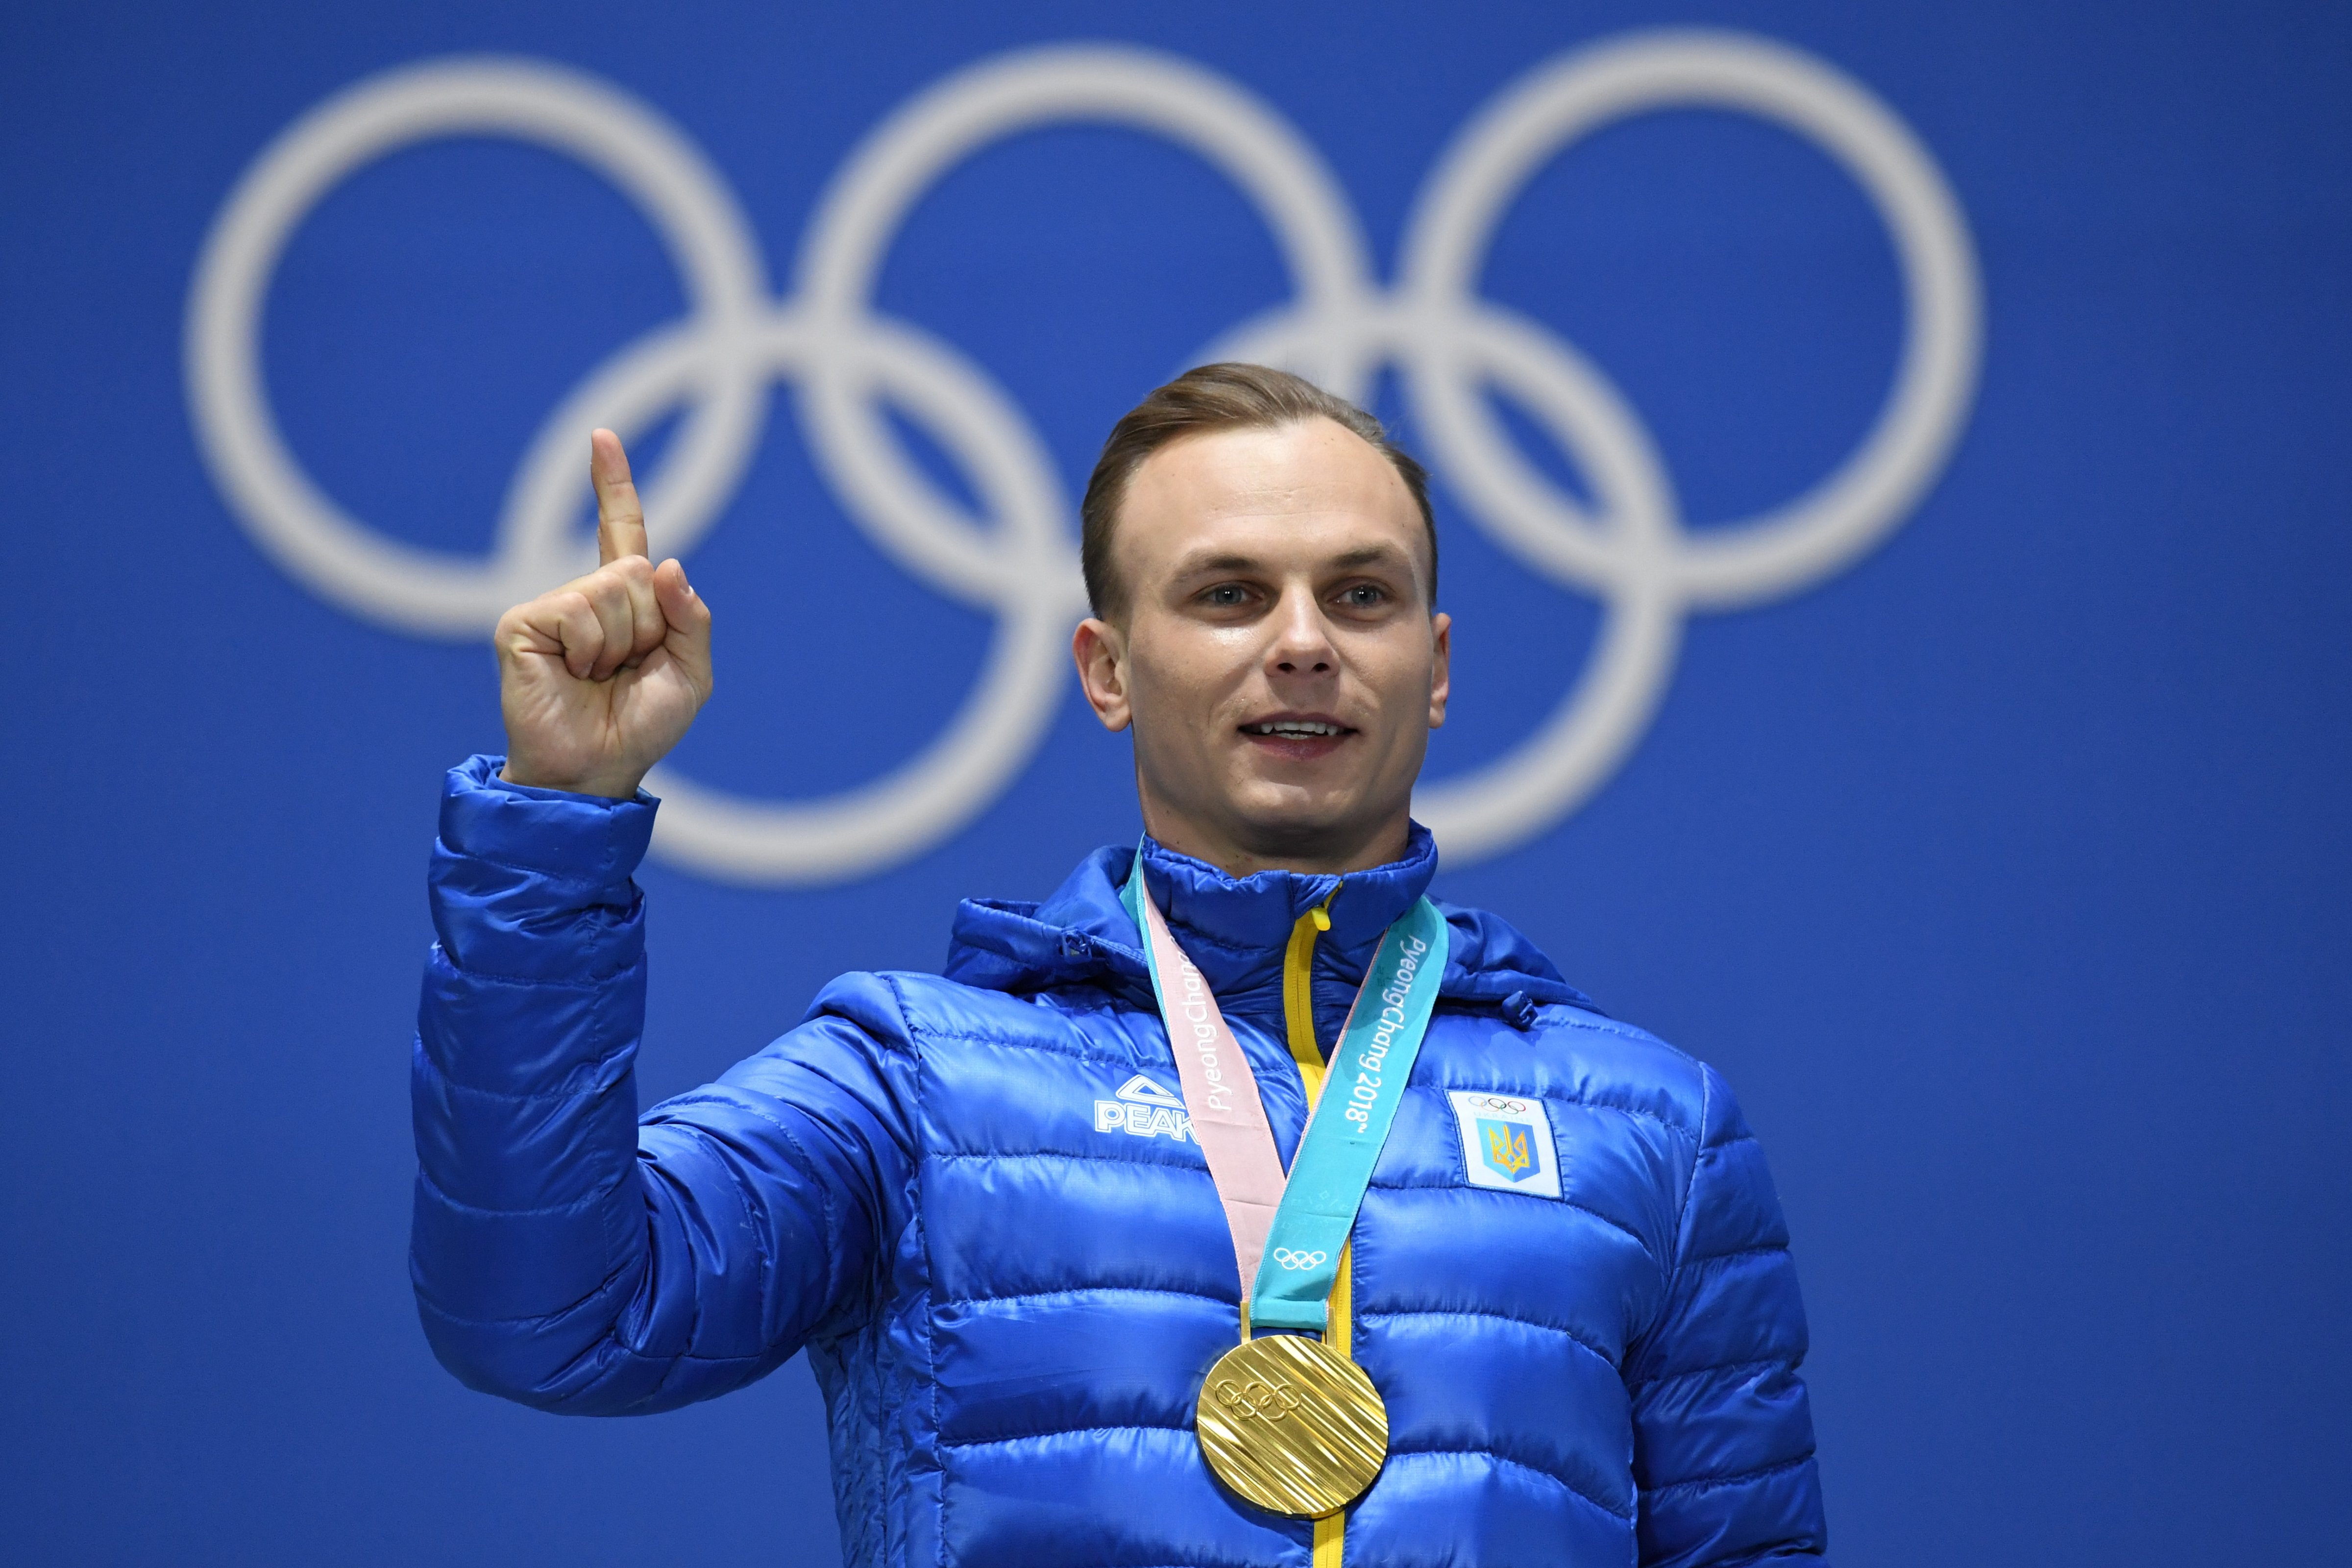 Ukraine's gold medallist Oleksandr Abramenko gestures on the podium during the medal ceremony for the freestyle skiing Men's Aerials (KIRILL KUDRYAVTSEV - AFP/Getty Images)